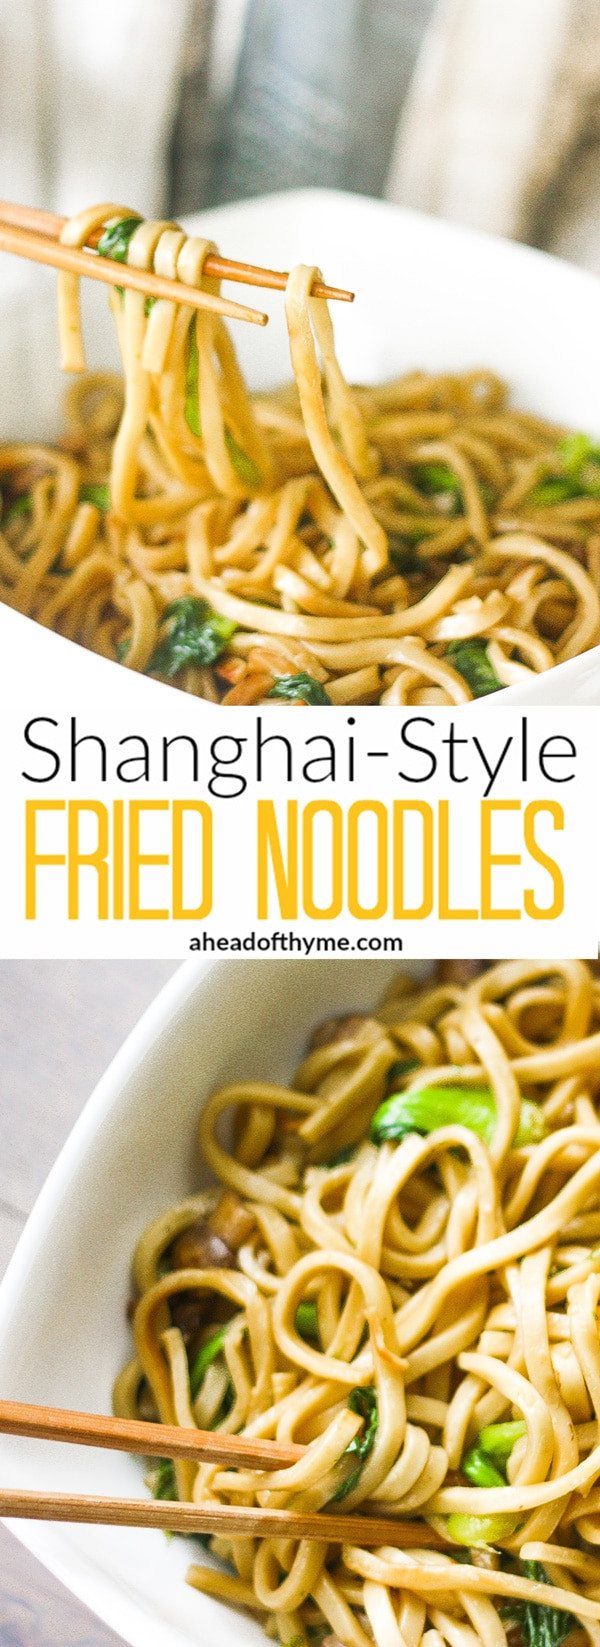 Shanghai Style Noodles
 Shanghai Style Fried Noodles